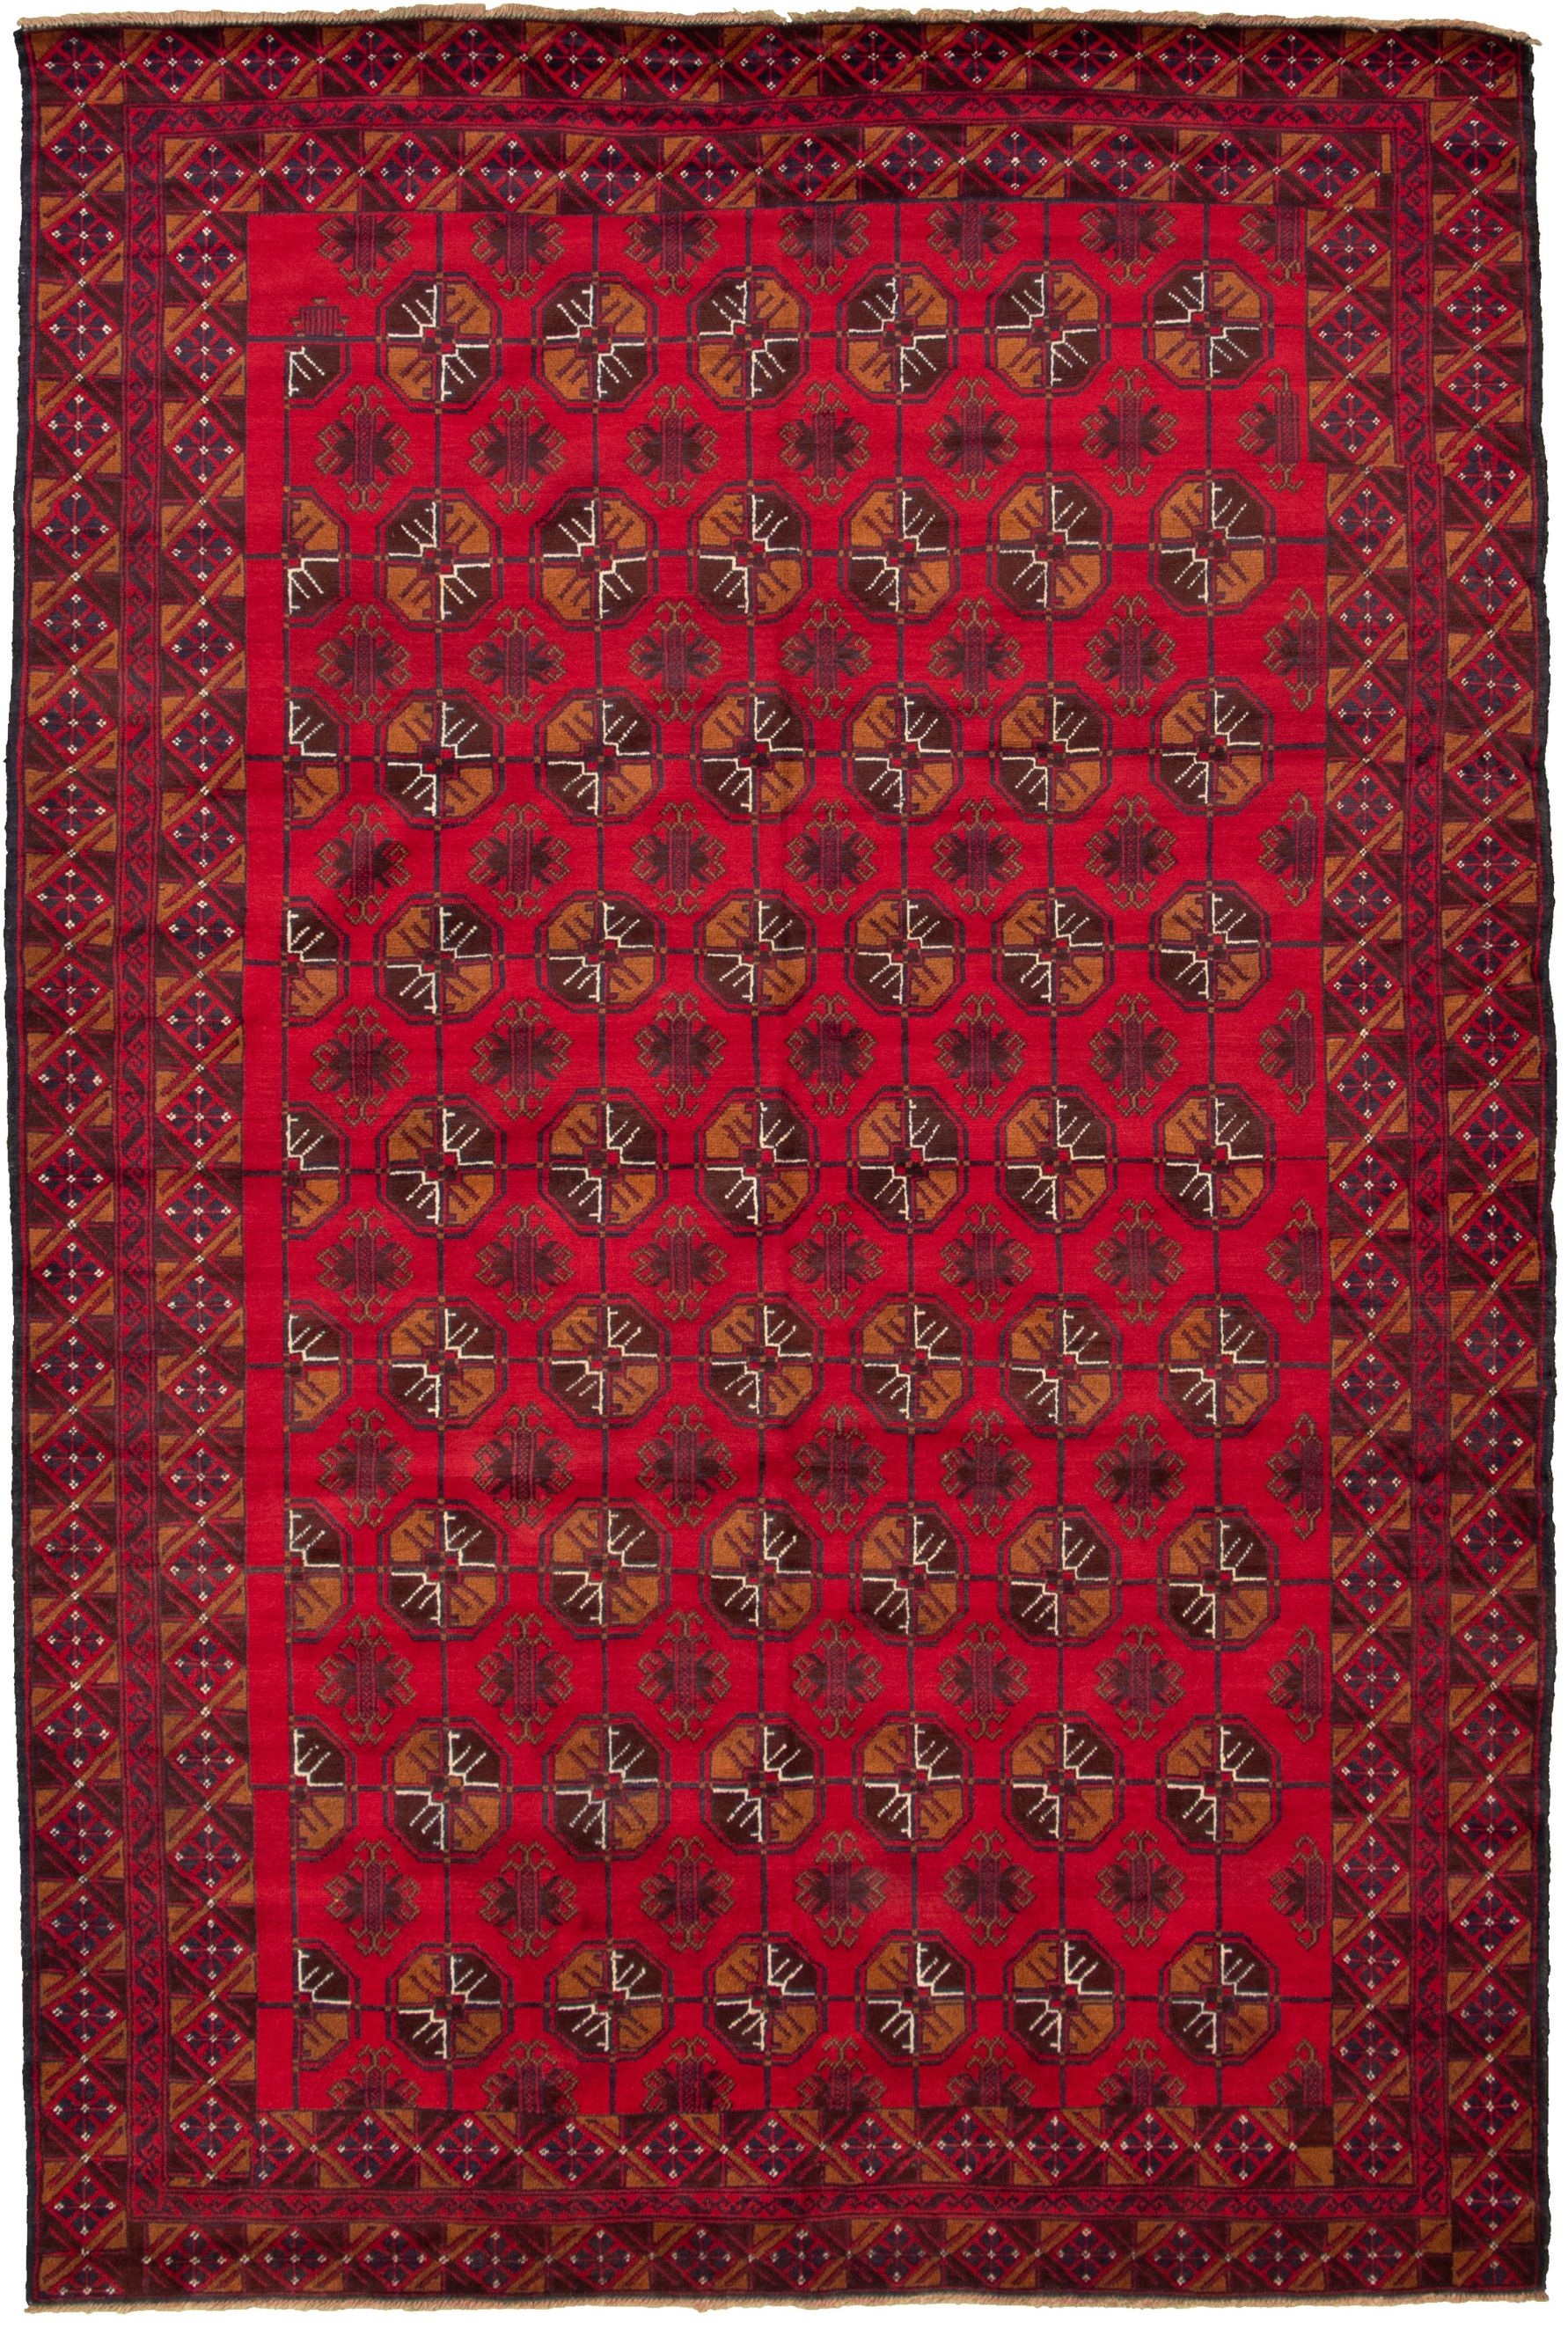 Hand-knotted Teimani Red Wool Rug 7'0" x 10'6" Size: 7'0" x 10'6"  